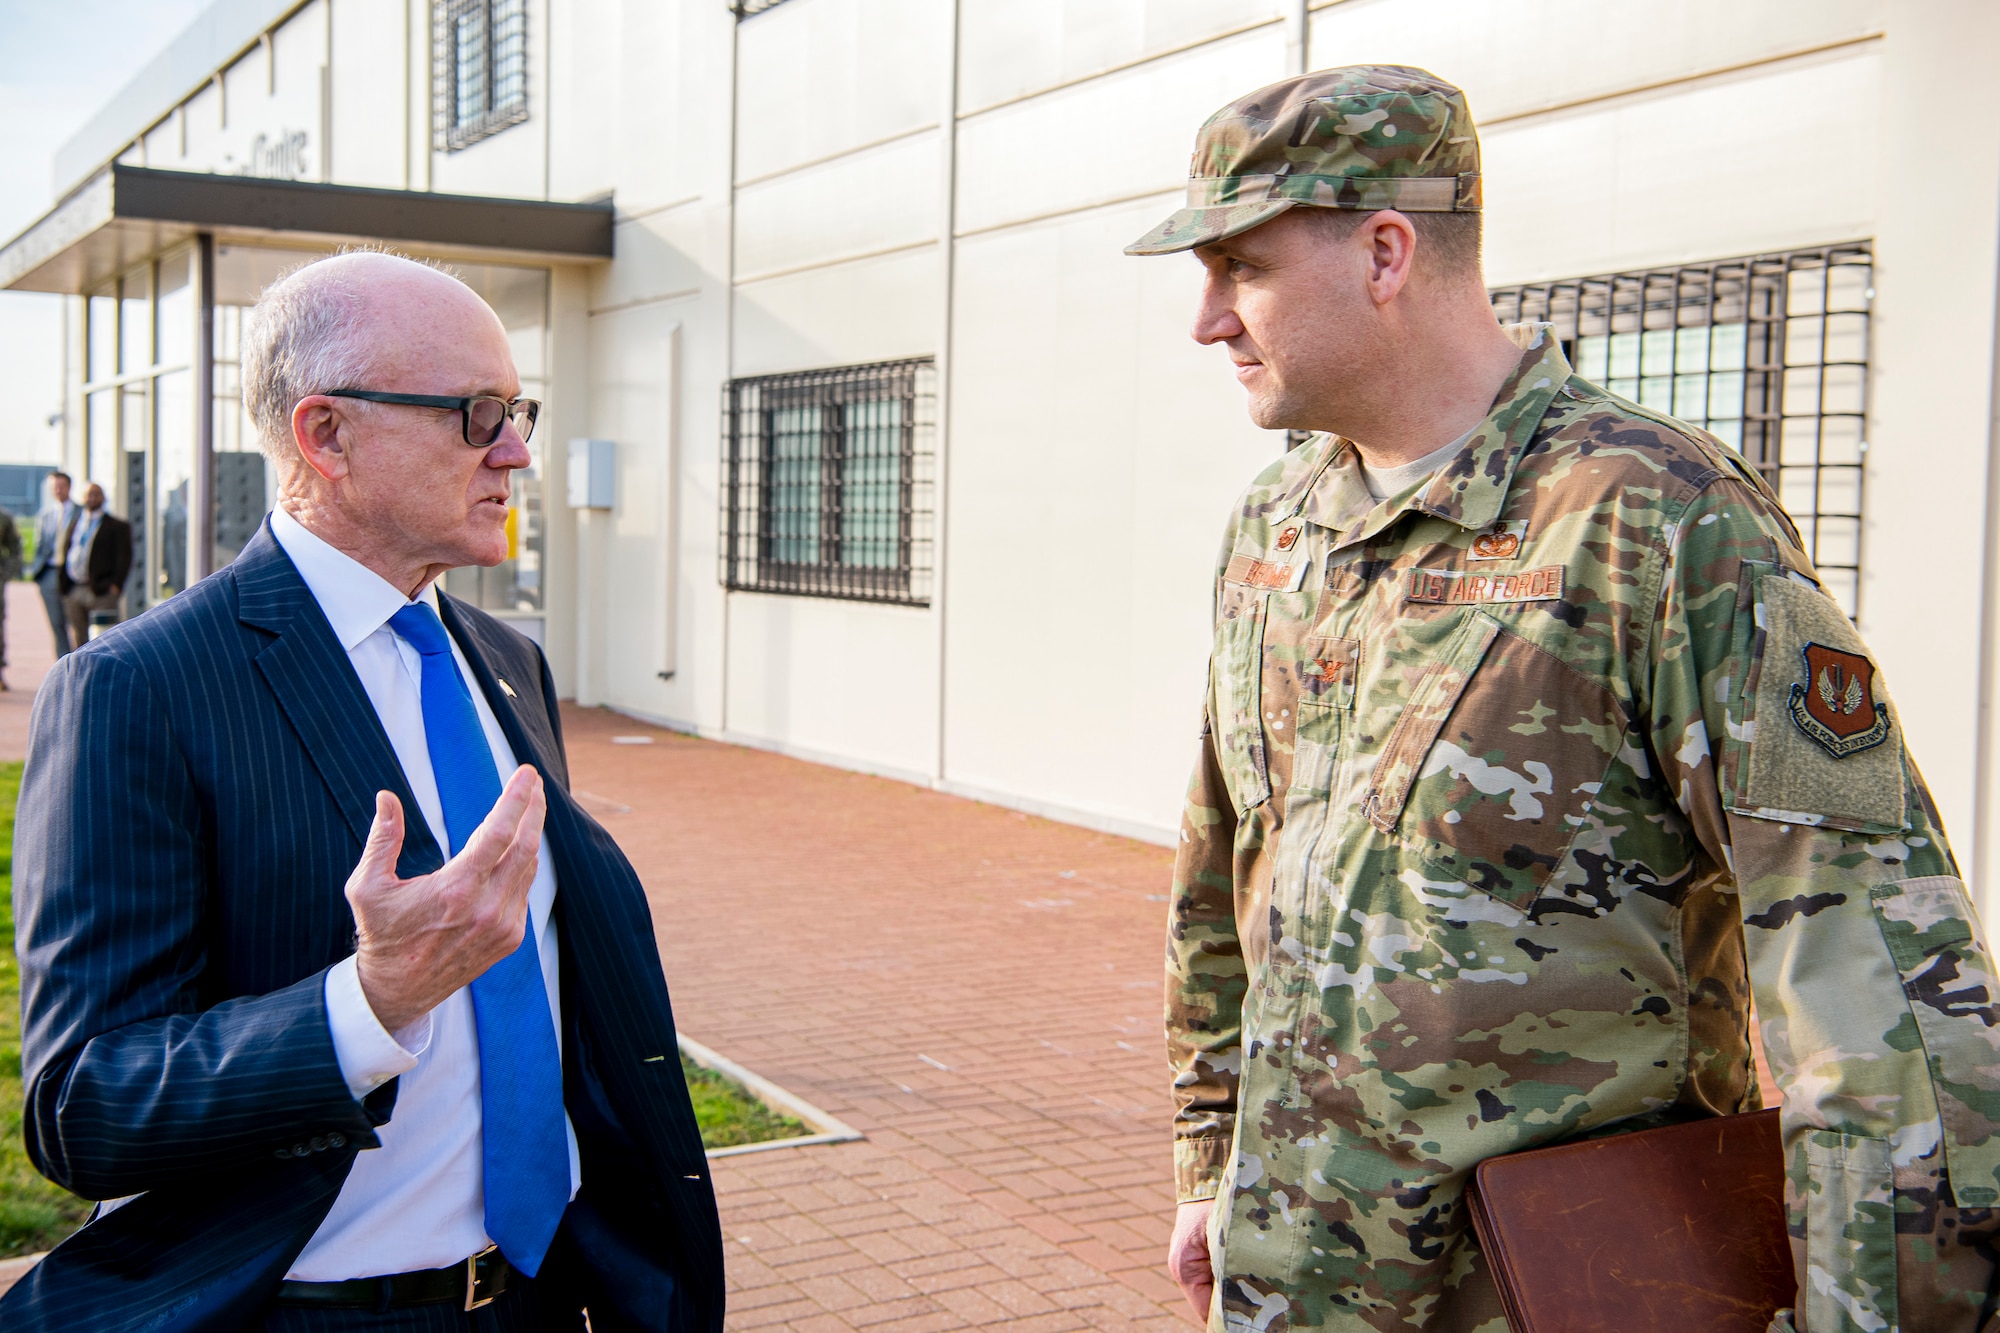 United States Ambassador to the United Kingdom, Robert Wood Johnson, (left), speaks with U.S. Air Force Col. Christopher Bromen, (right), 423d Air Base Group commander, during a visit to RAF Molesworth, England, Feb. 7, 2020. Johnson visited RAF Molesworth, which is part of the 501st Combat Support Wing, to build more relationships with personnel and gain a better understanding of their overall mission, capabilities and comprehensive duties. (U.S. Air Force photo by Senior Airman Eugene Oliver)